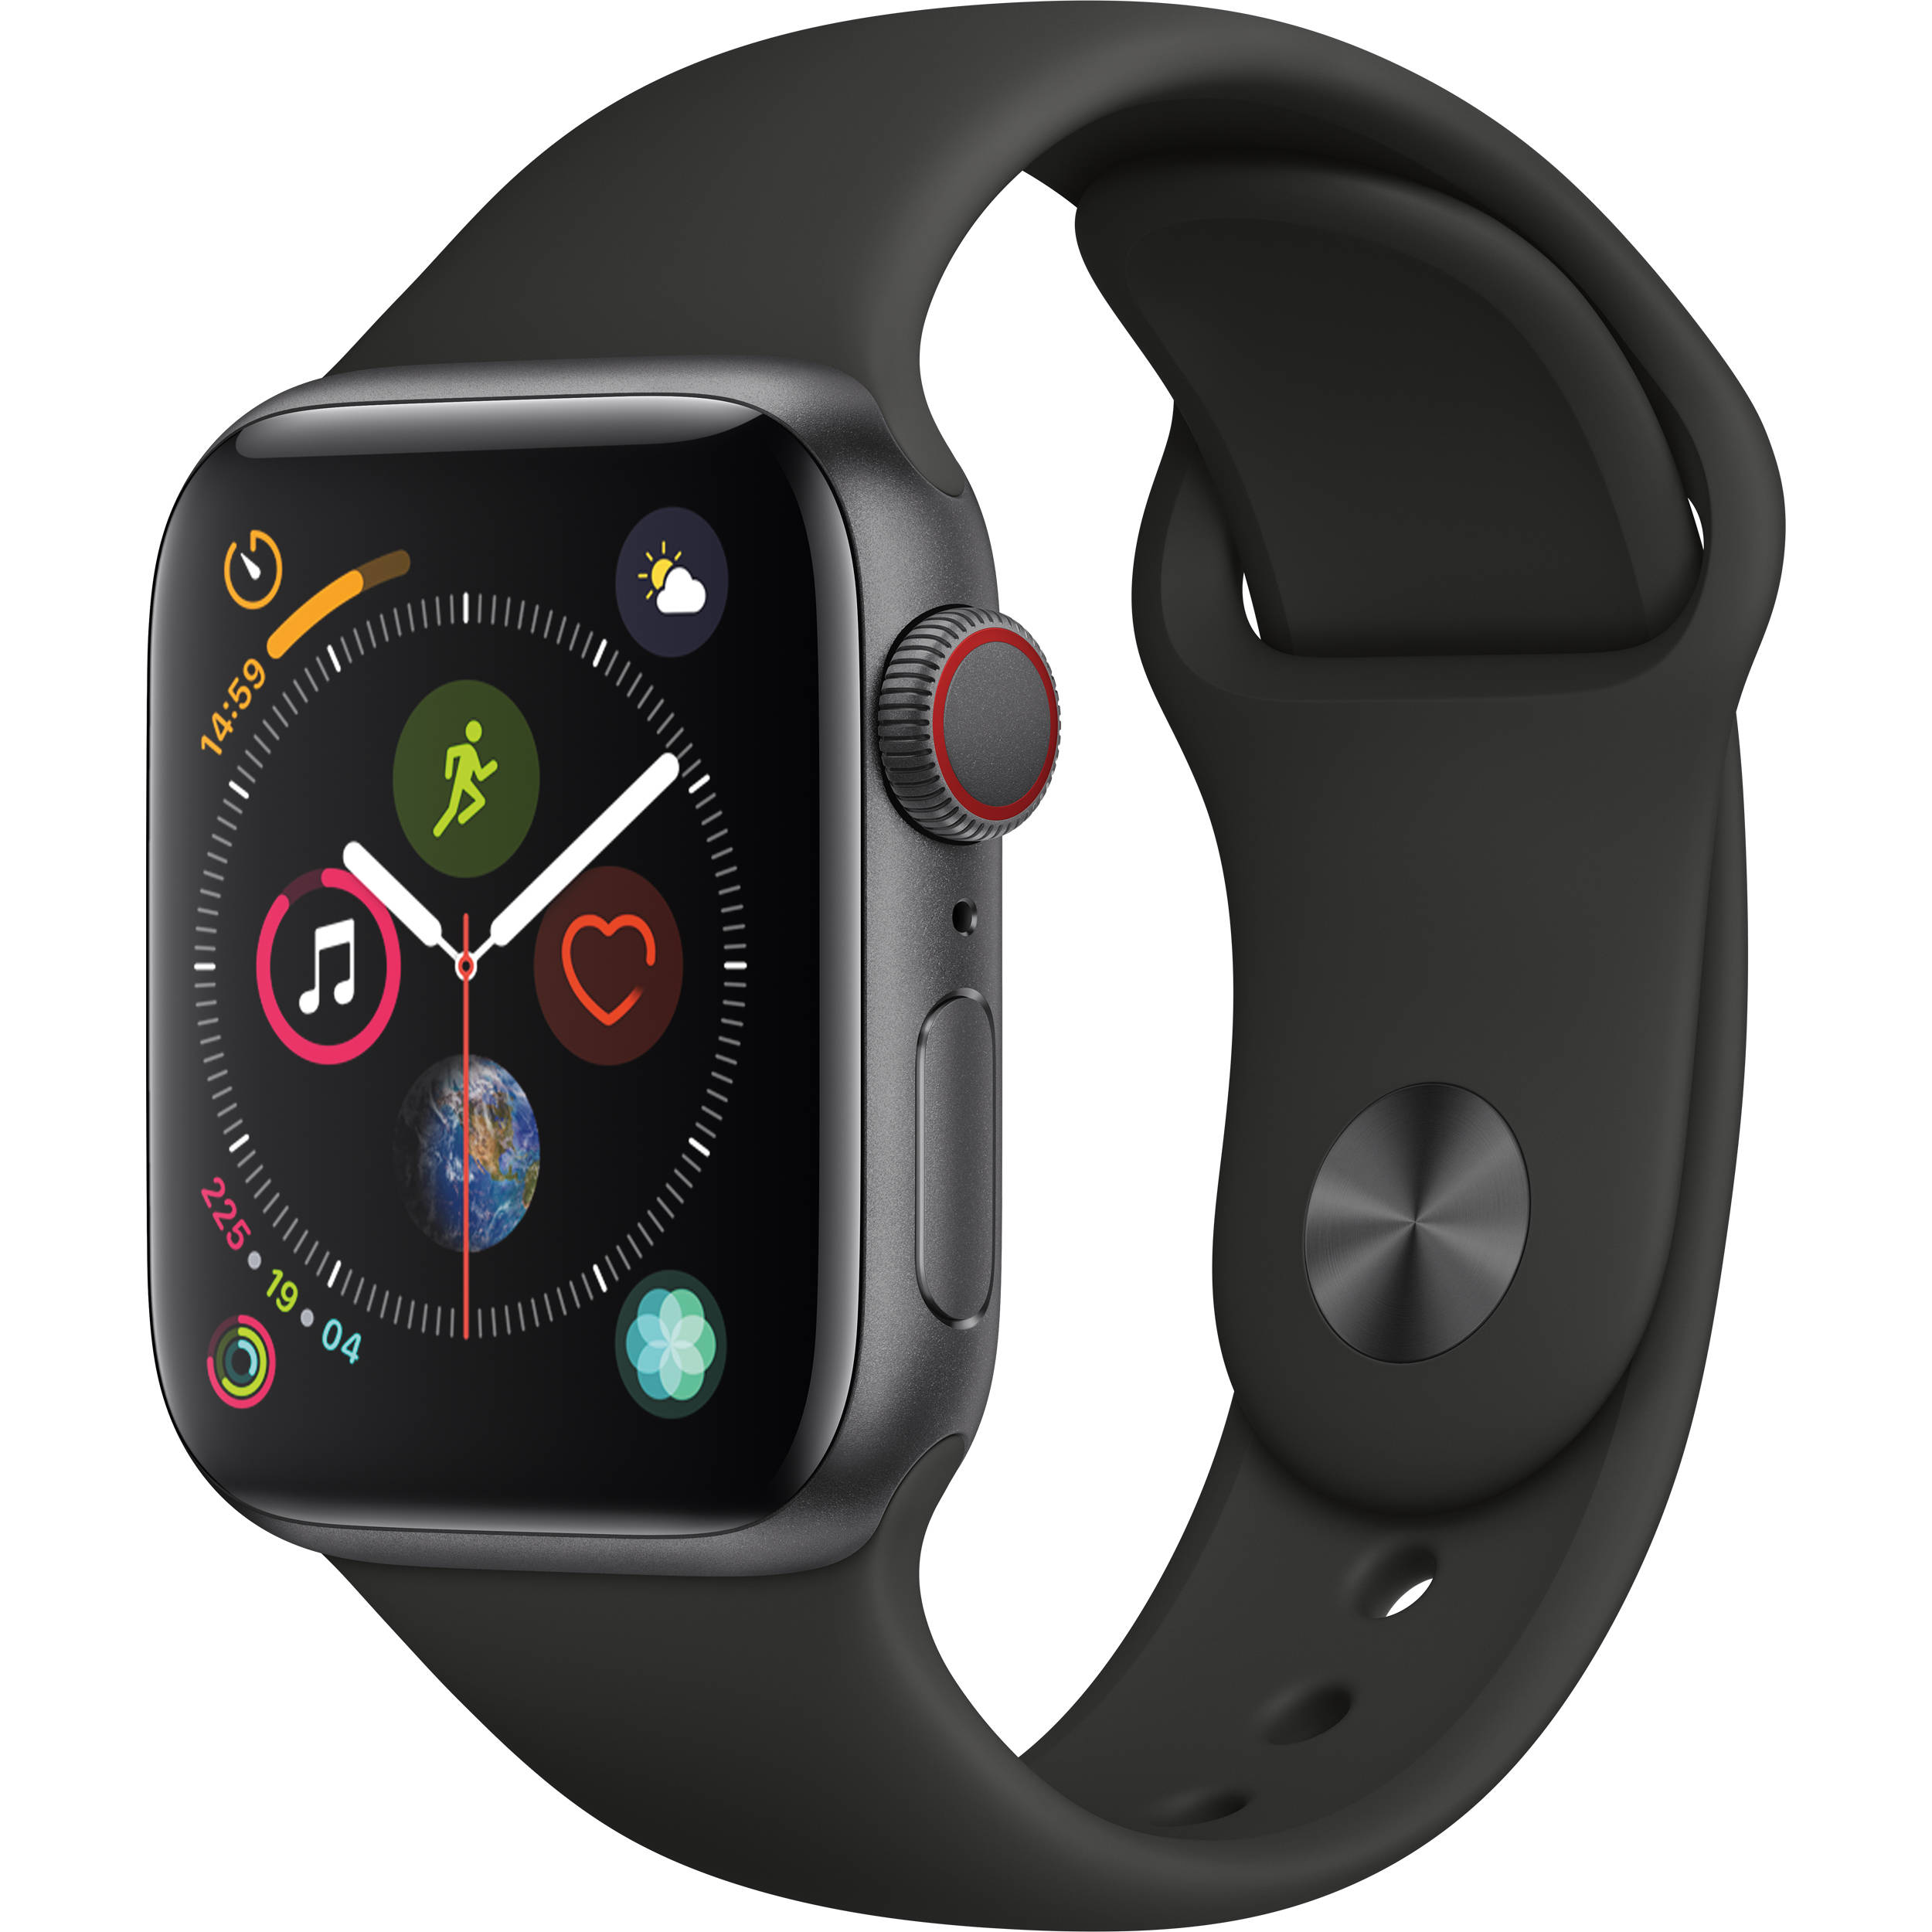 Apple Watch Series 4 Black Aluminum Case with blackl Sport Band (GPS) 44mm Band fits 140–210mm wrists